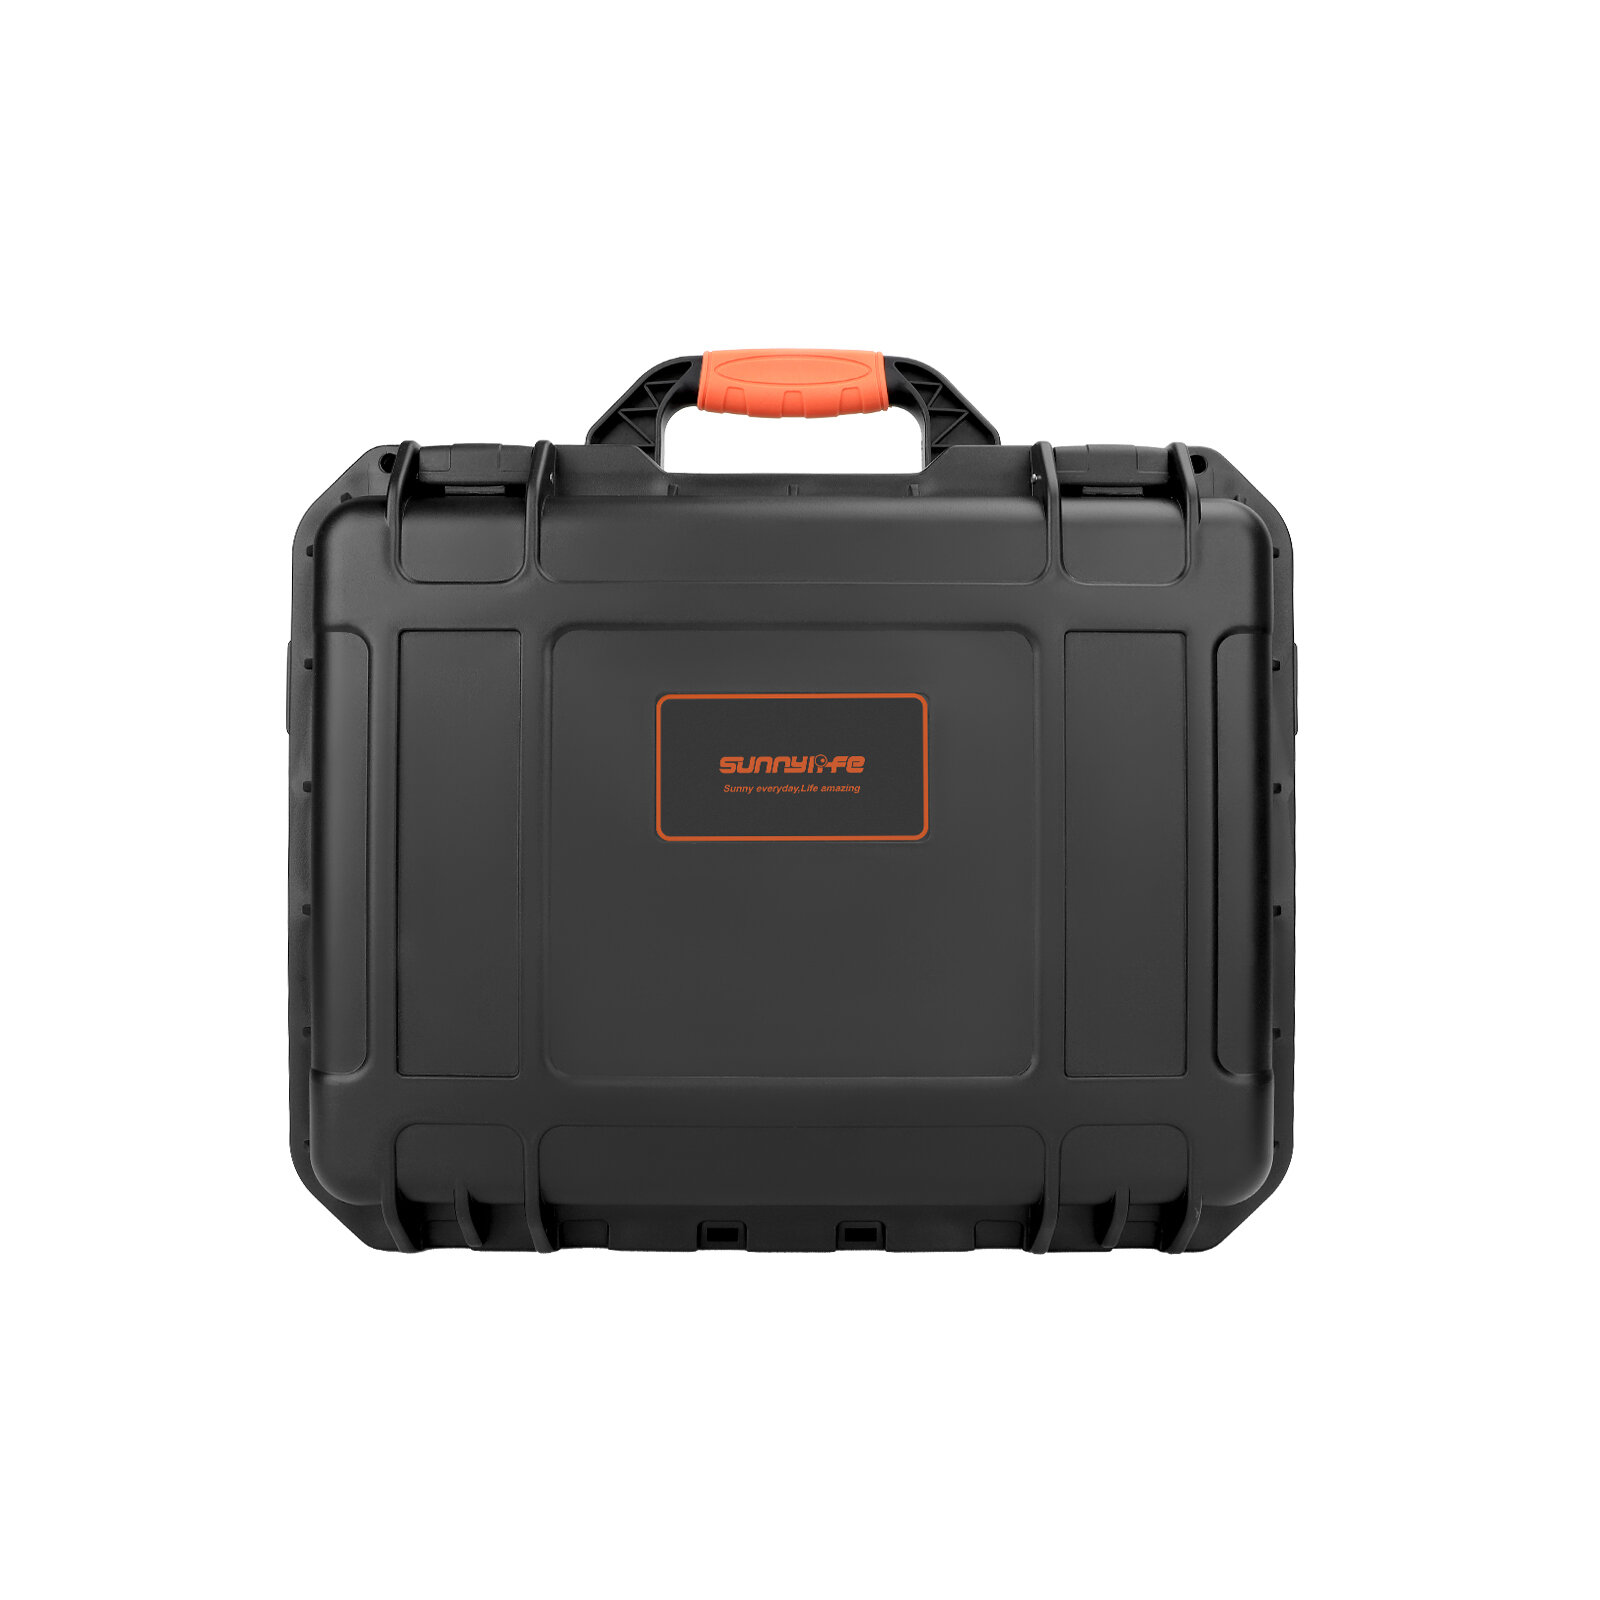 Image of Sunnylife Portable Waterproof Explosion Proof Suitcase Storage Bag Handbag Carrying Box Case for DJI Mini 3 PRO RC Drone